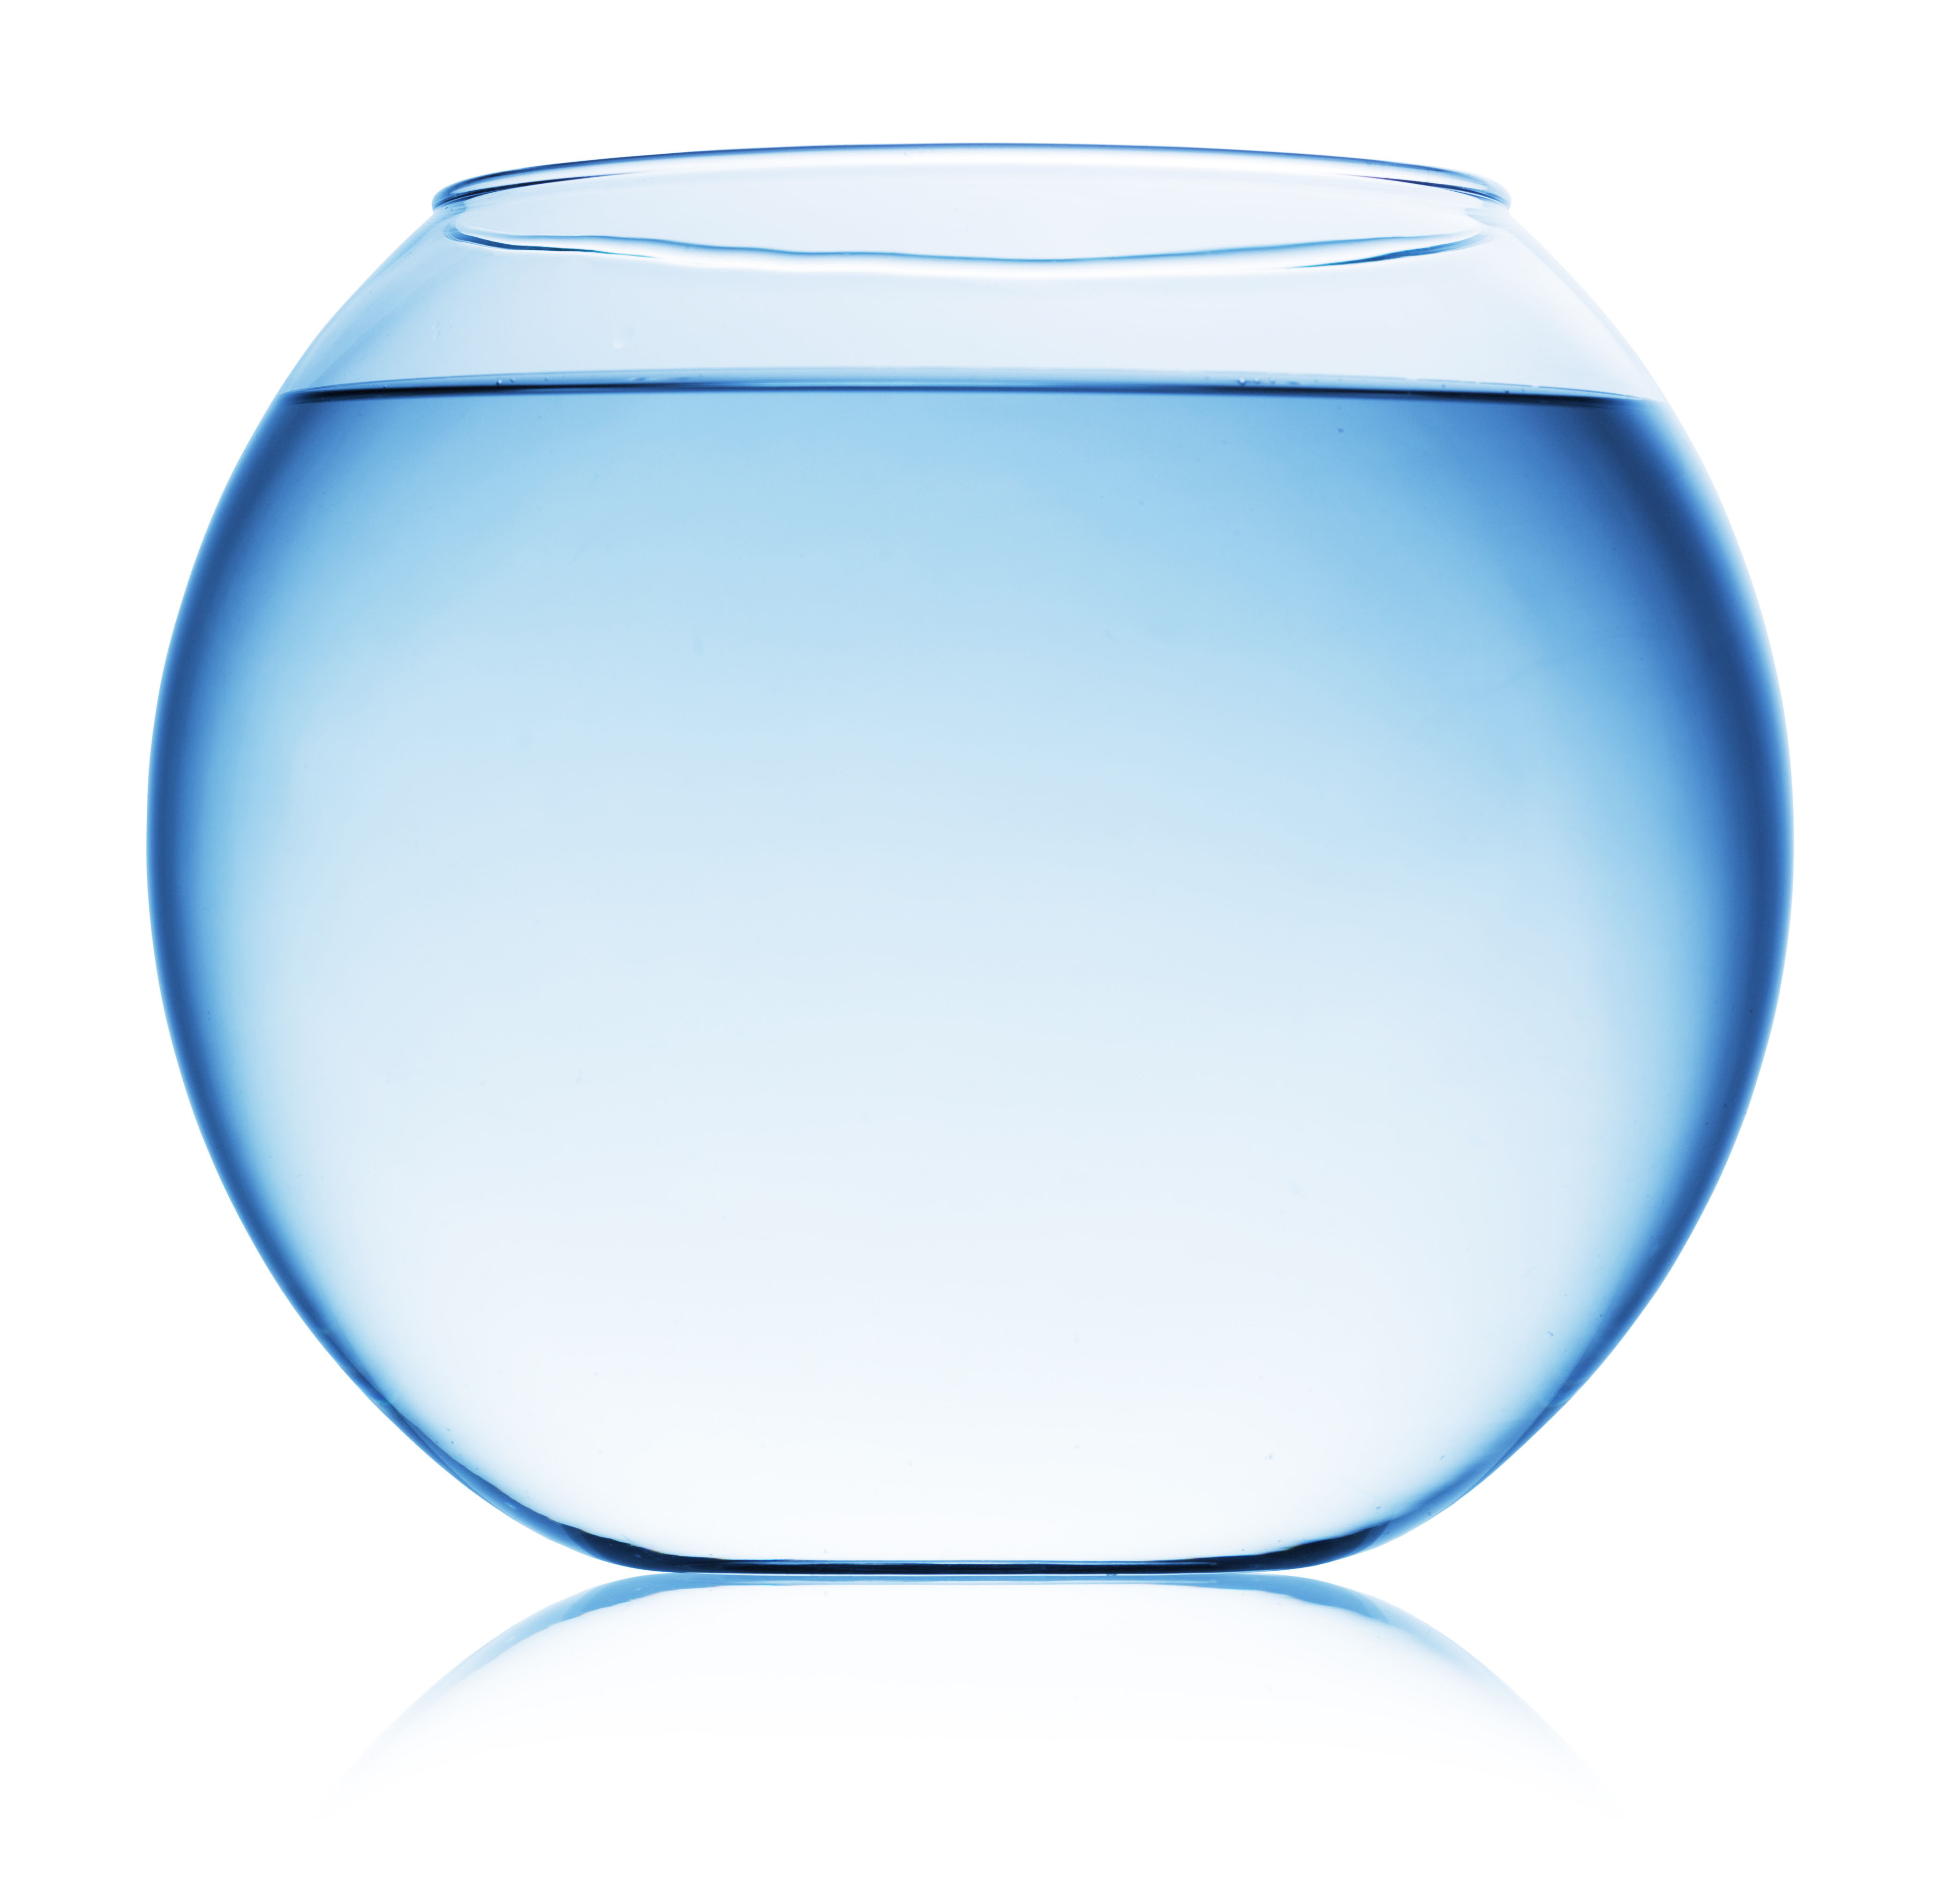 Fish Bowl Template - HD Photos Gallery